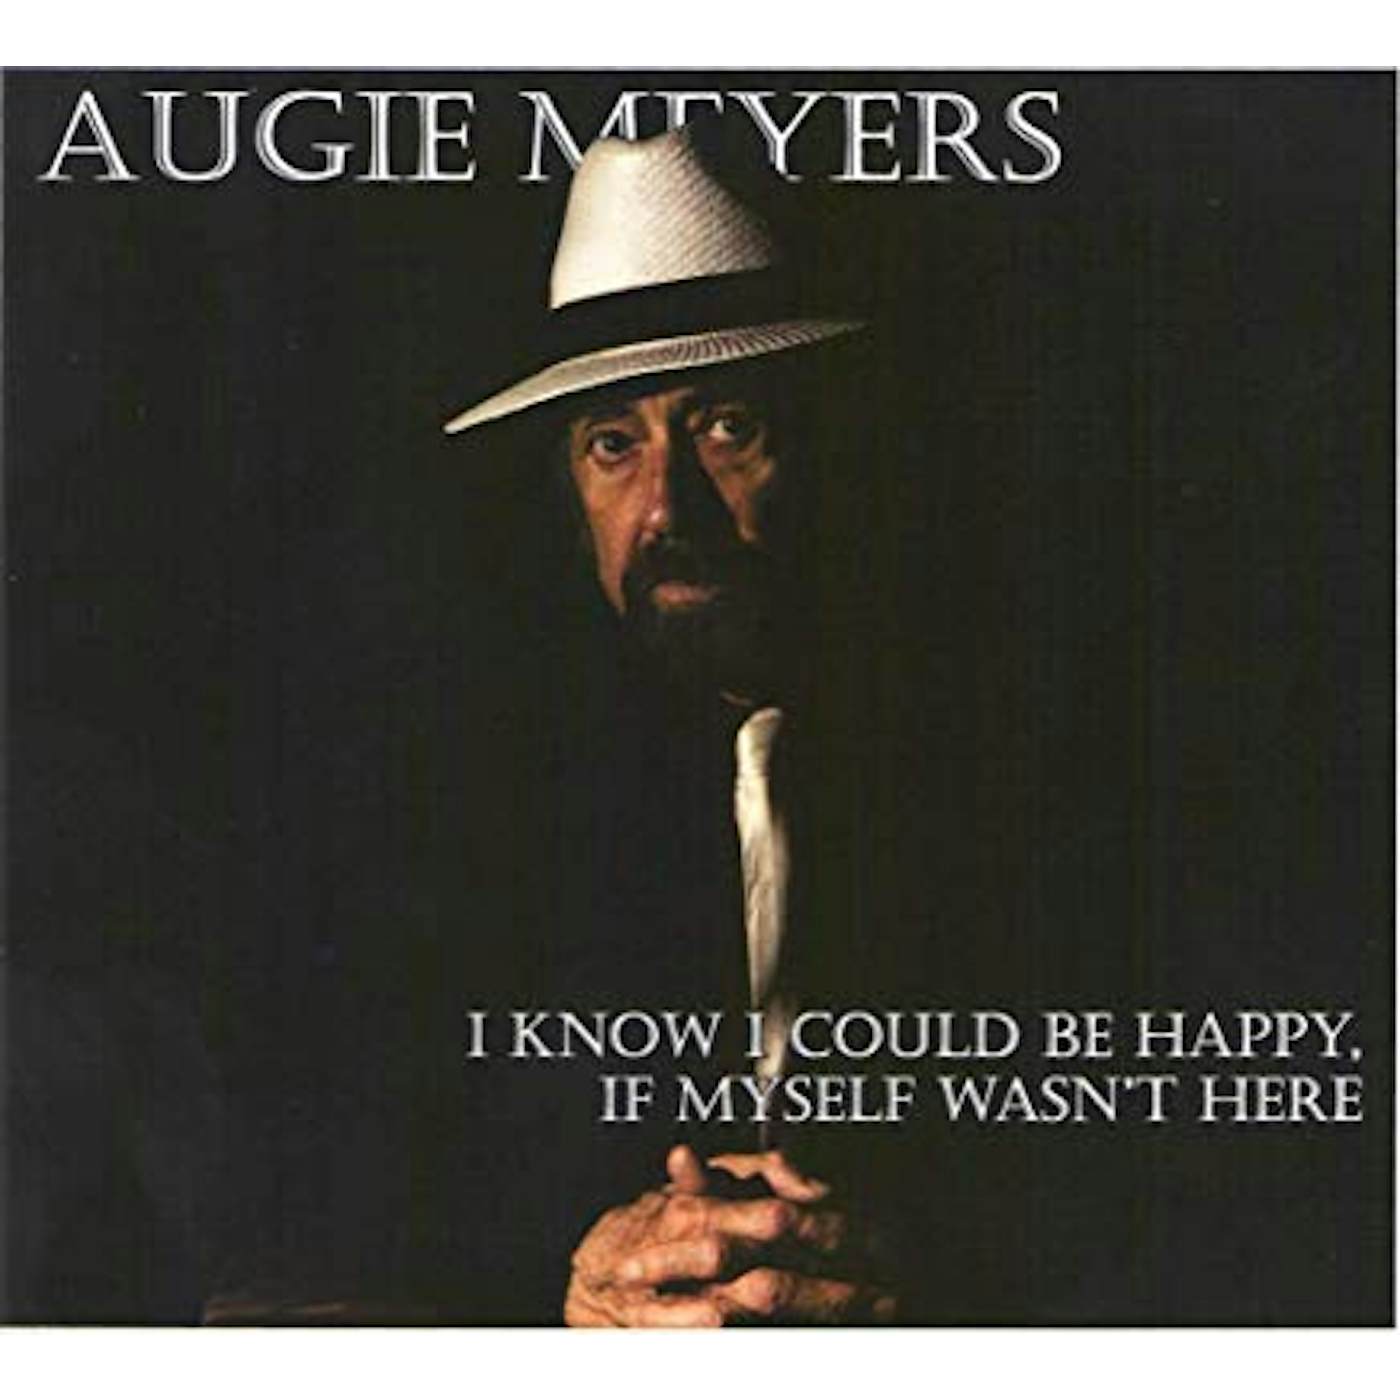 Augie Meyers I KNOW I COULD BE HAPPY IF MYSELF WASN'T HERE CD